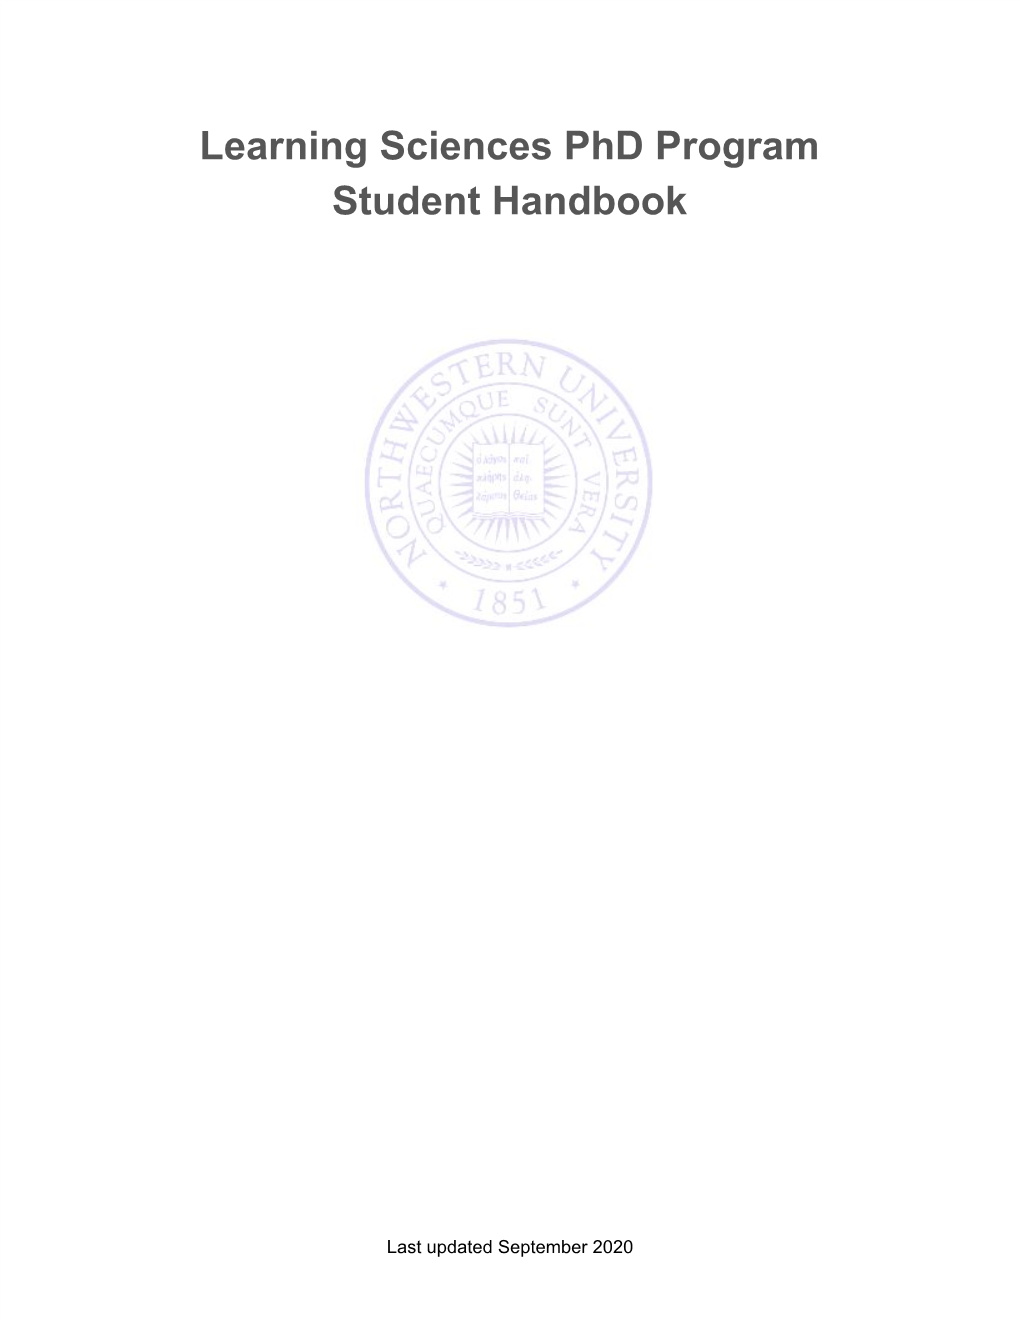 Download the Phd in Learning Sciences Handbook